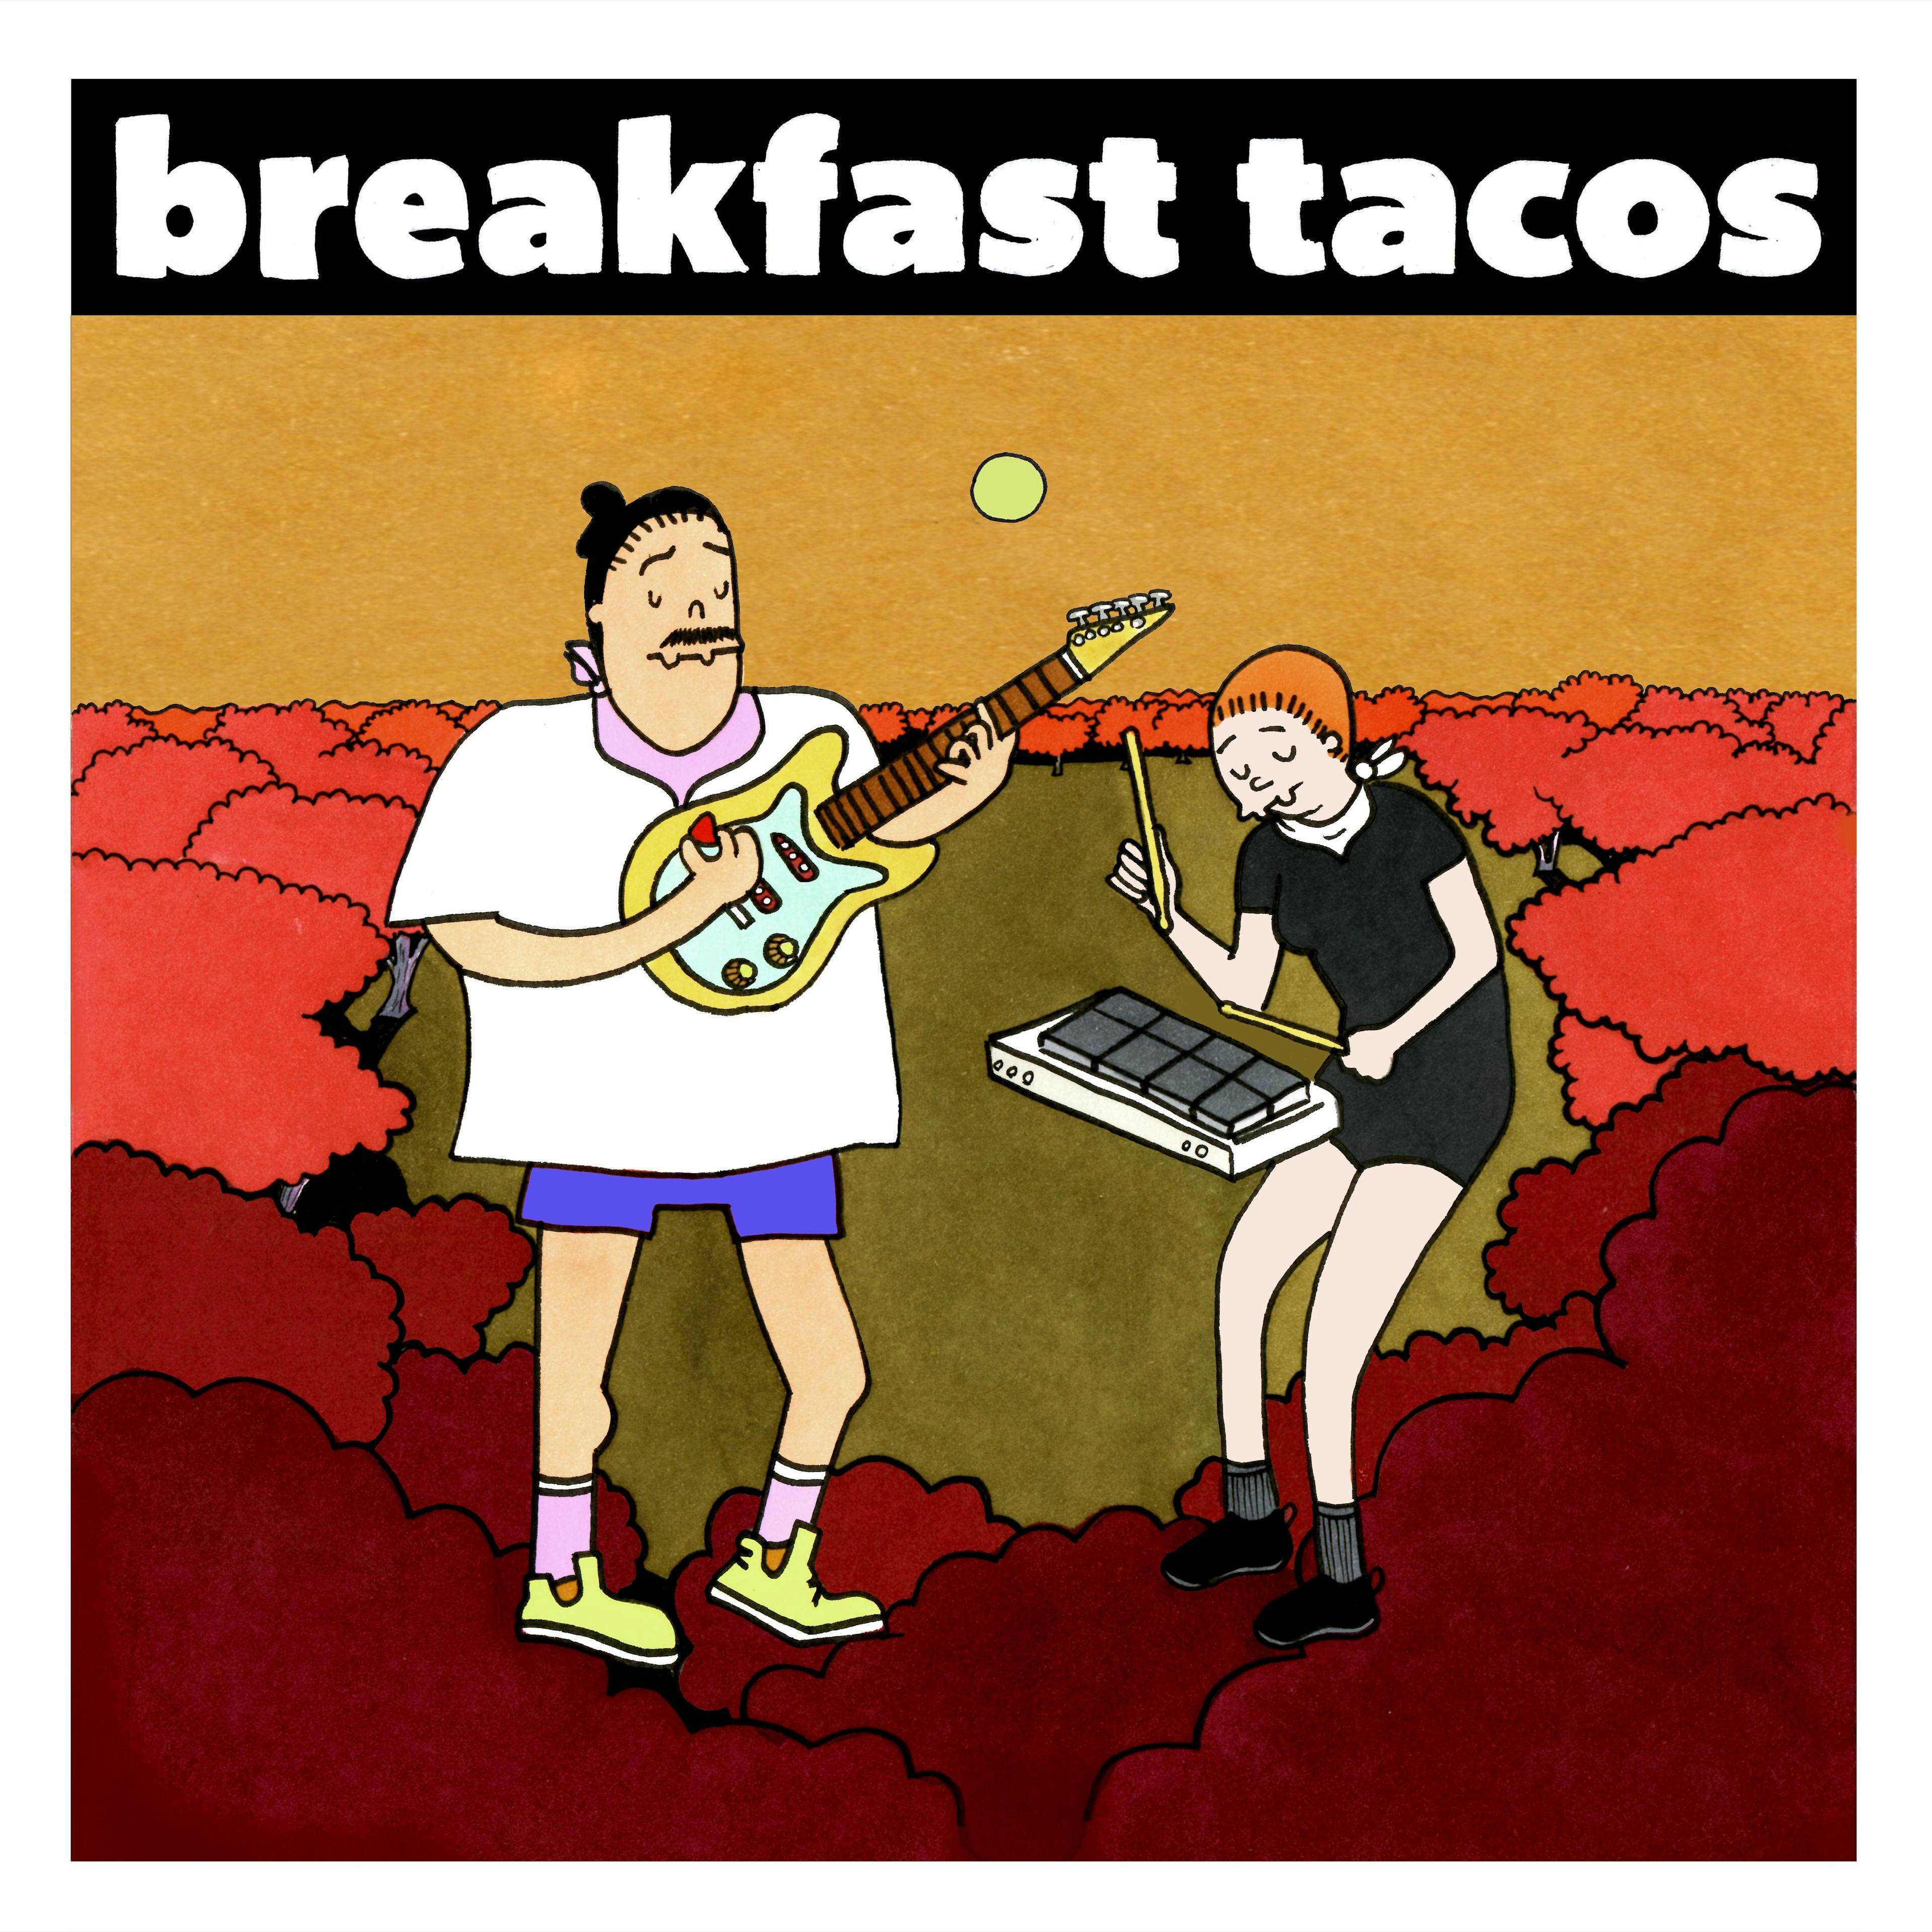 Cover art for camiseta grande (big t-shirt) by breakfast tacos